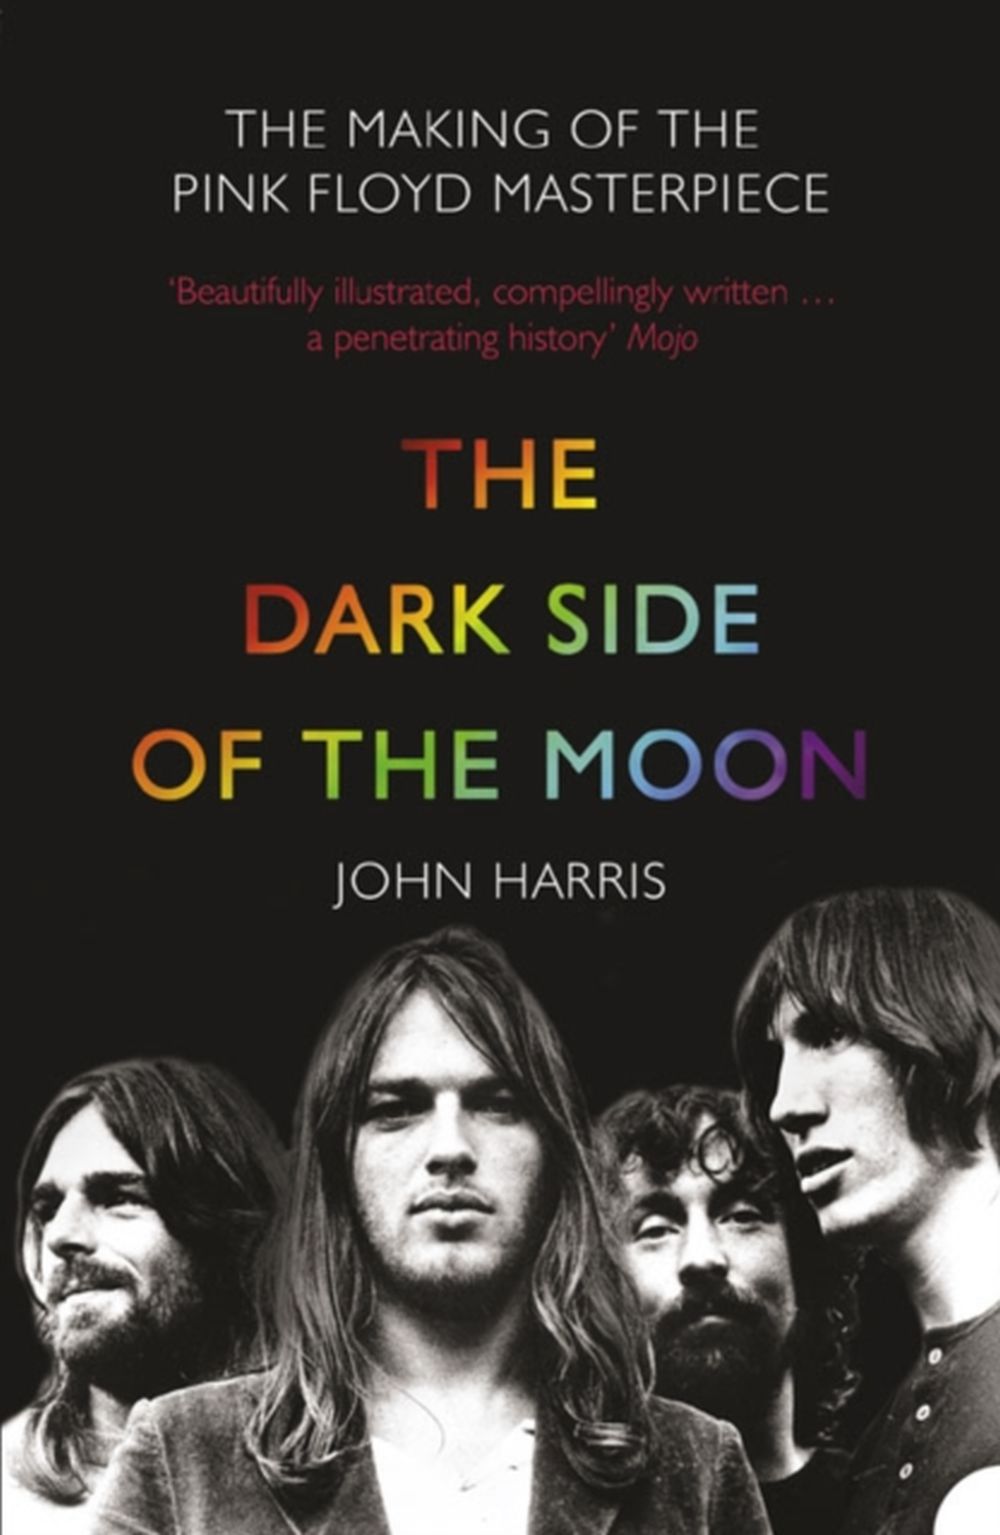 Pink Floyd - Harris, John - Dark Side Of The Moon, The: The Making Of The Pink Floyd Masterpiece - Book - New